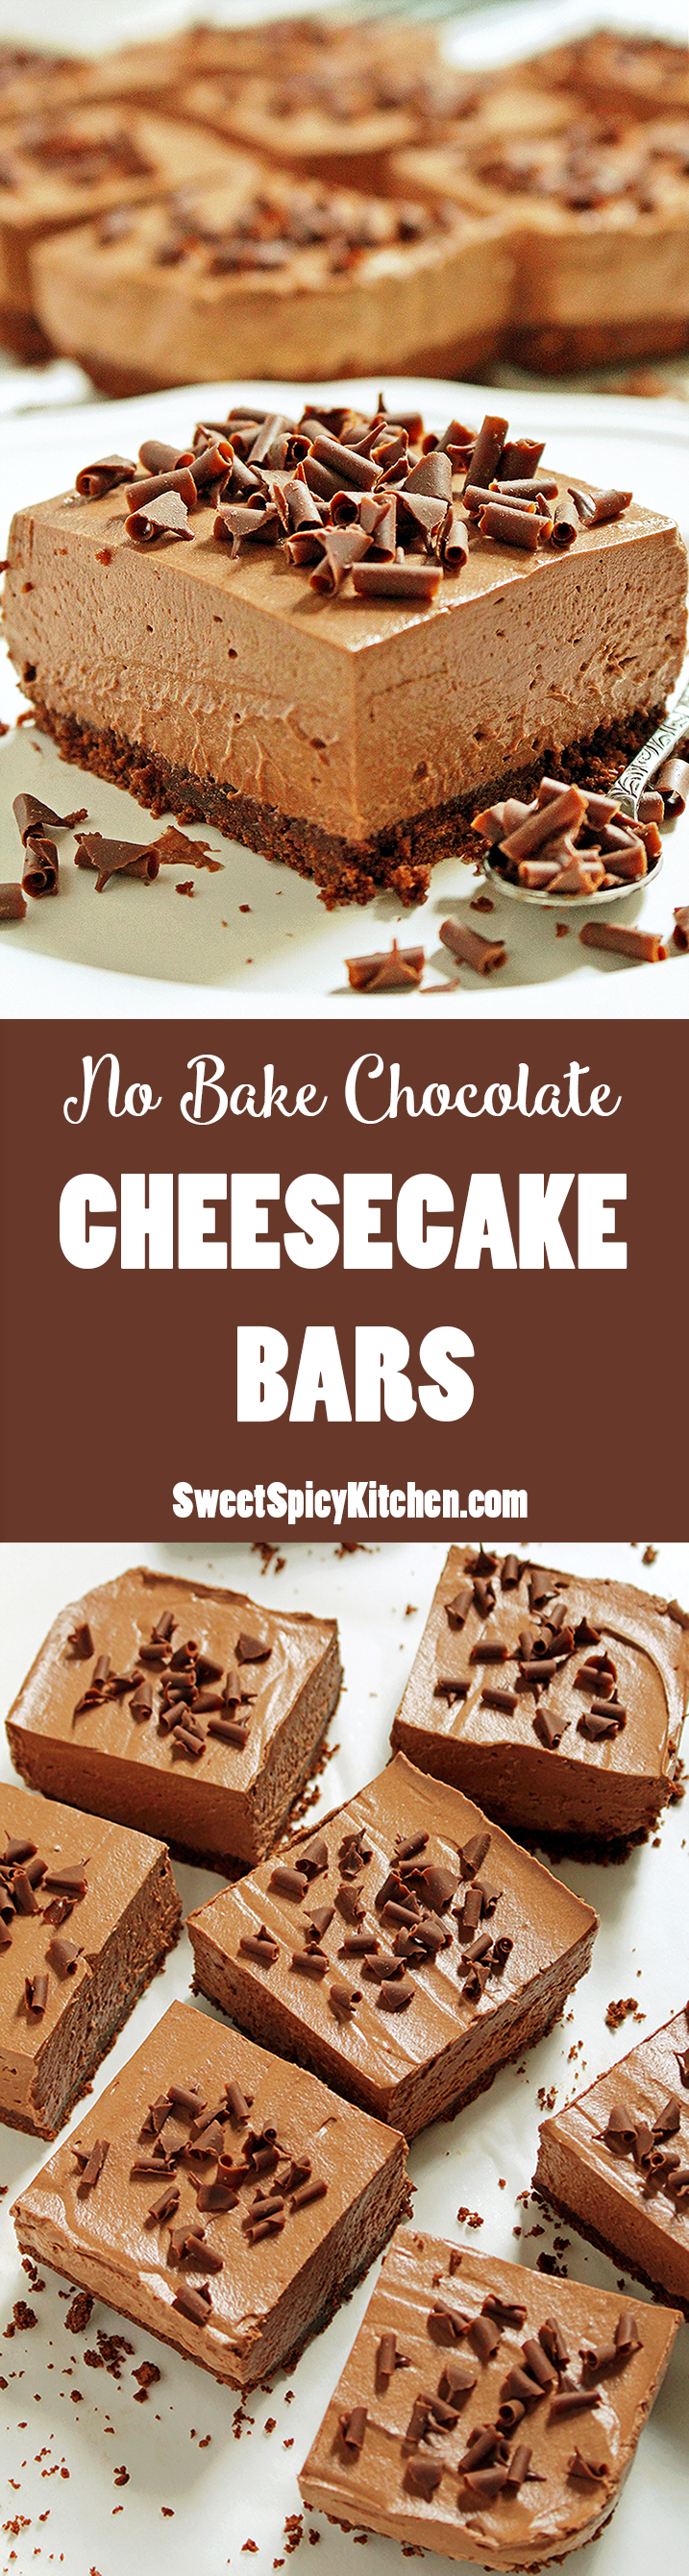 These creamy chocolate cheesecakes sprinkled with chocolate swirls create an amazingly delicious bar dessert – NO BAKE CHOCOLATE CHEESECAKE BARS!